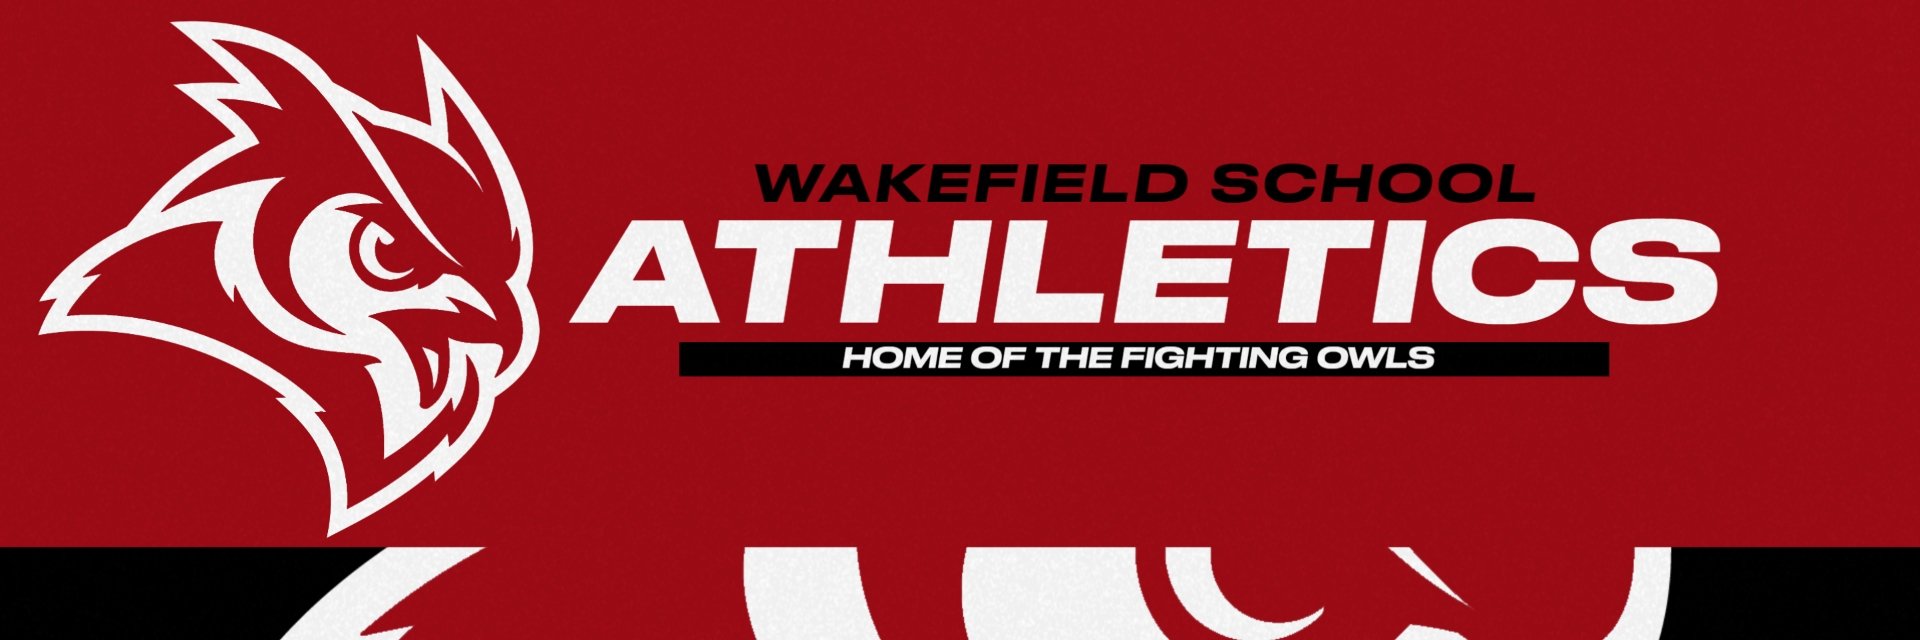 Wakefield School Athletics: Home of the Fighting Owls banner